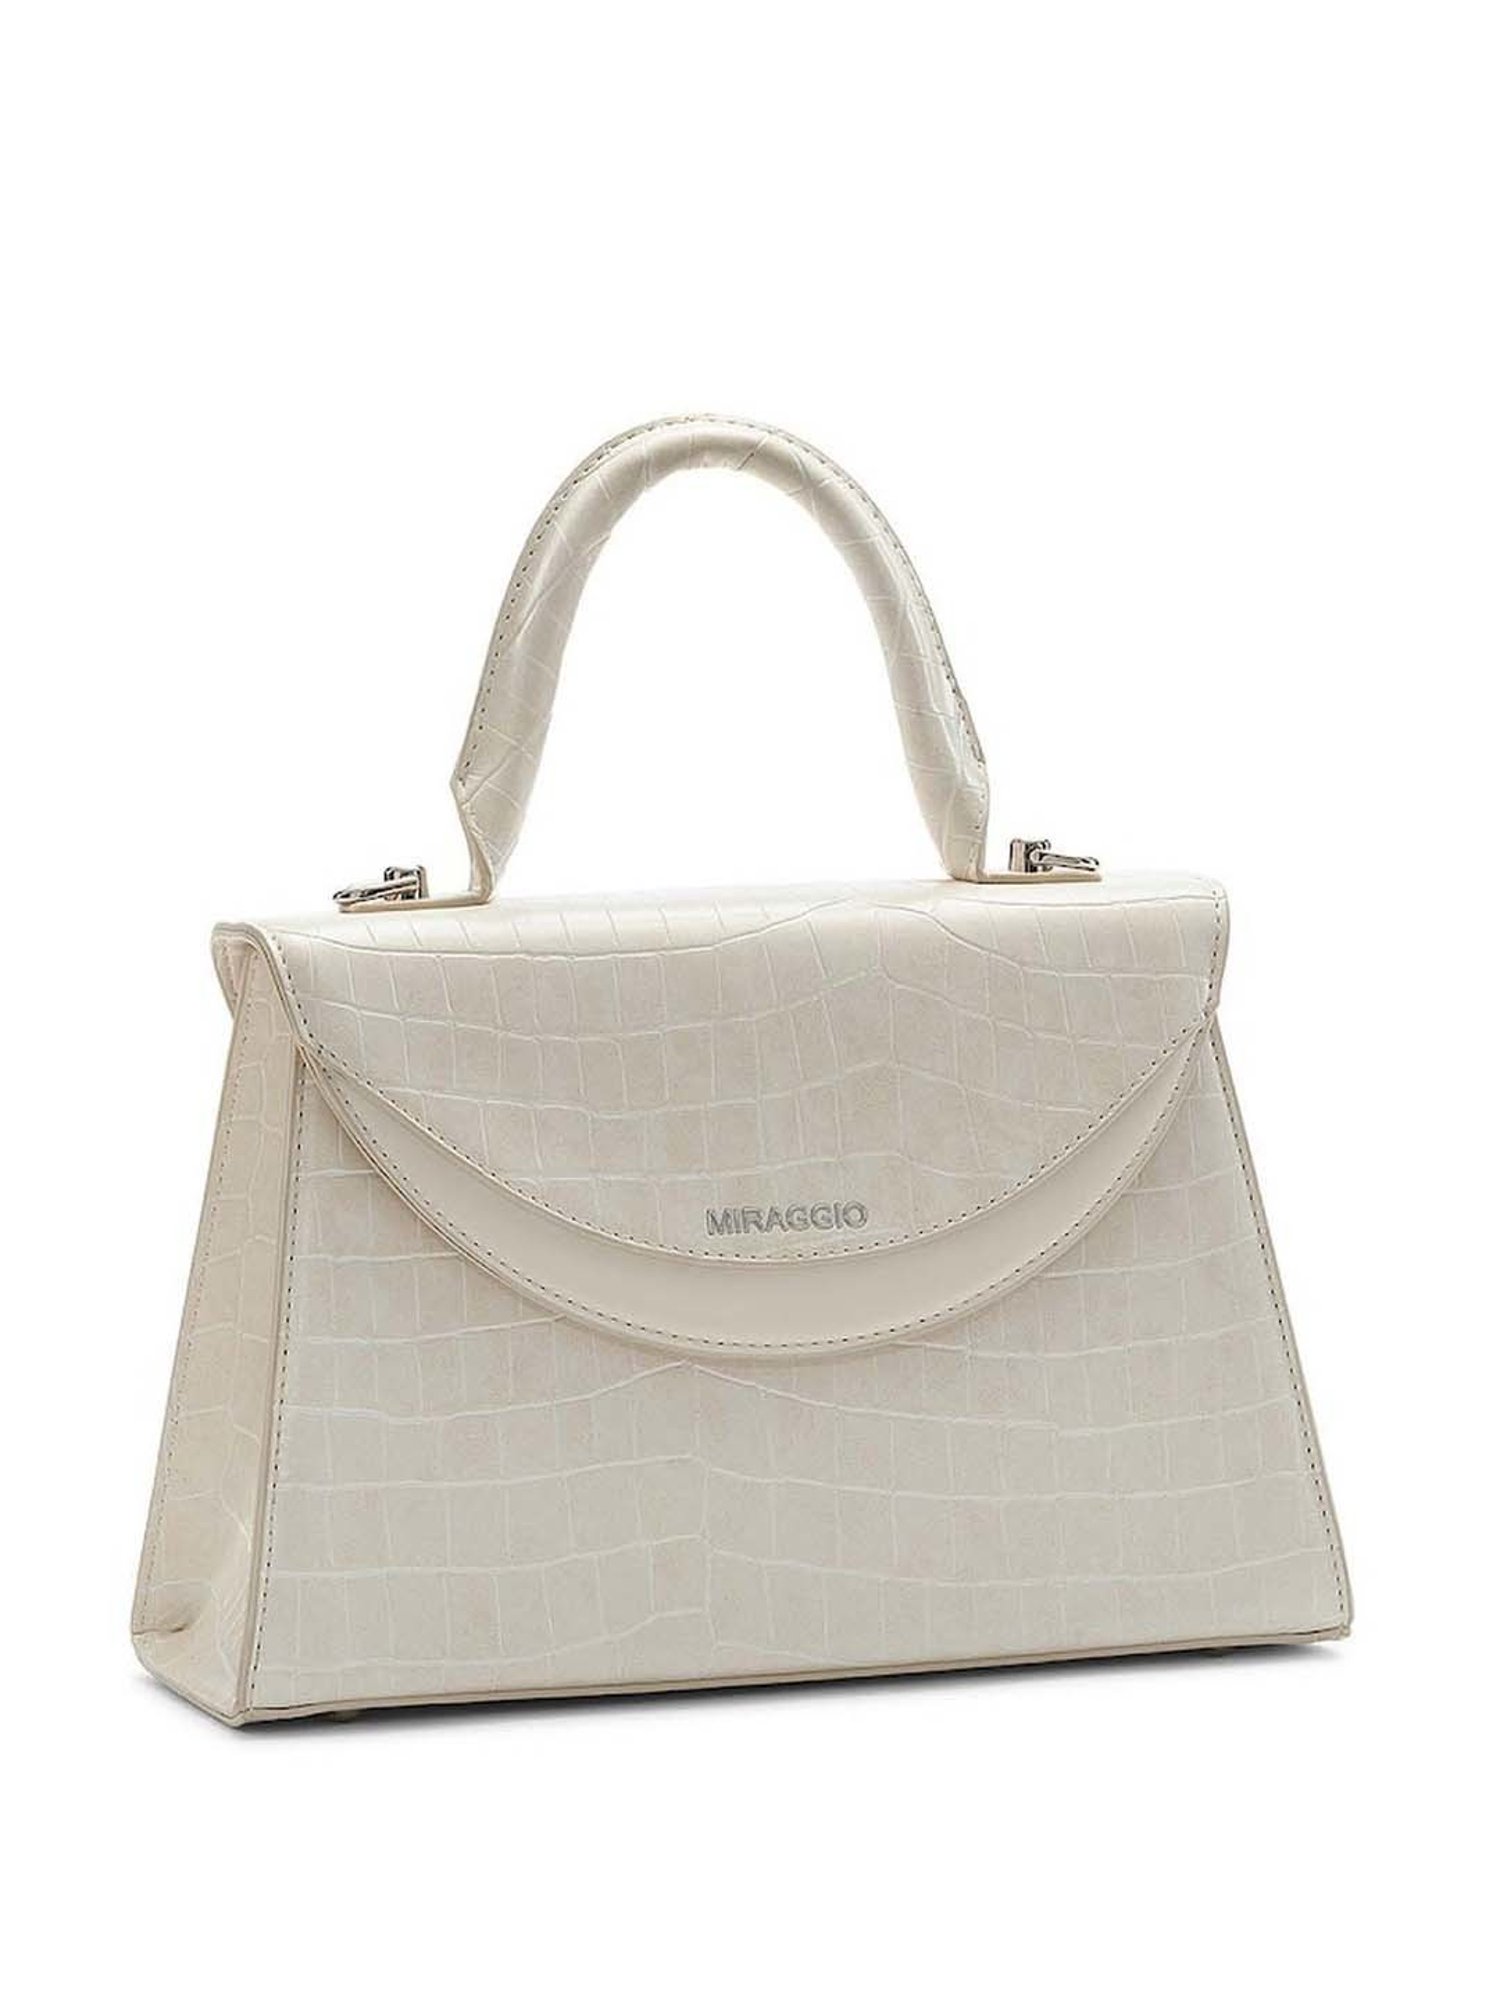 Buy Brown & White Handbags for Women by Miraggio Online